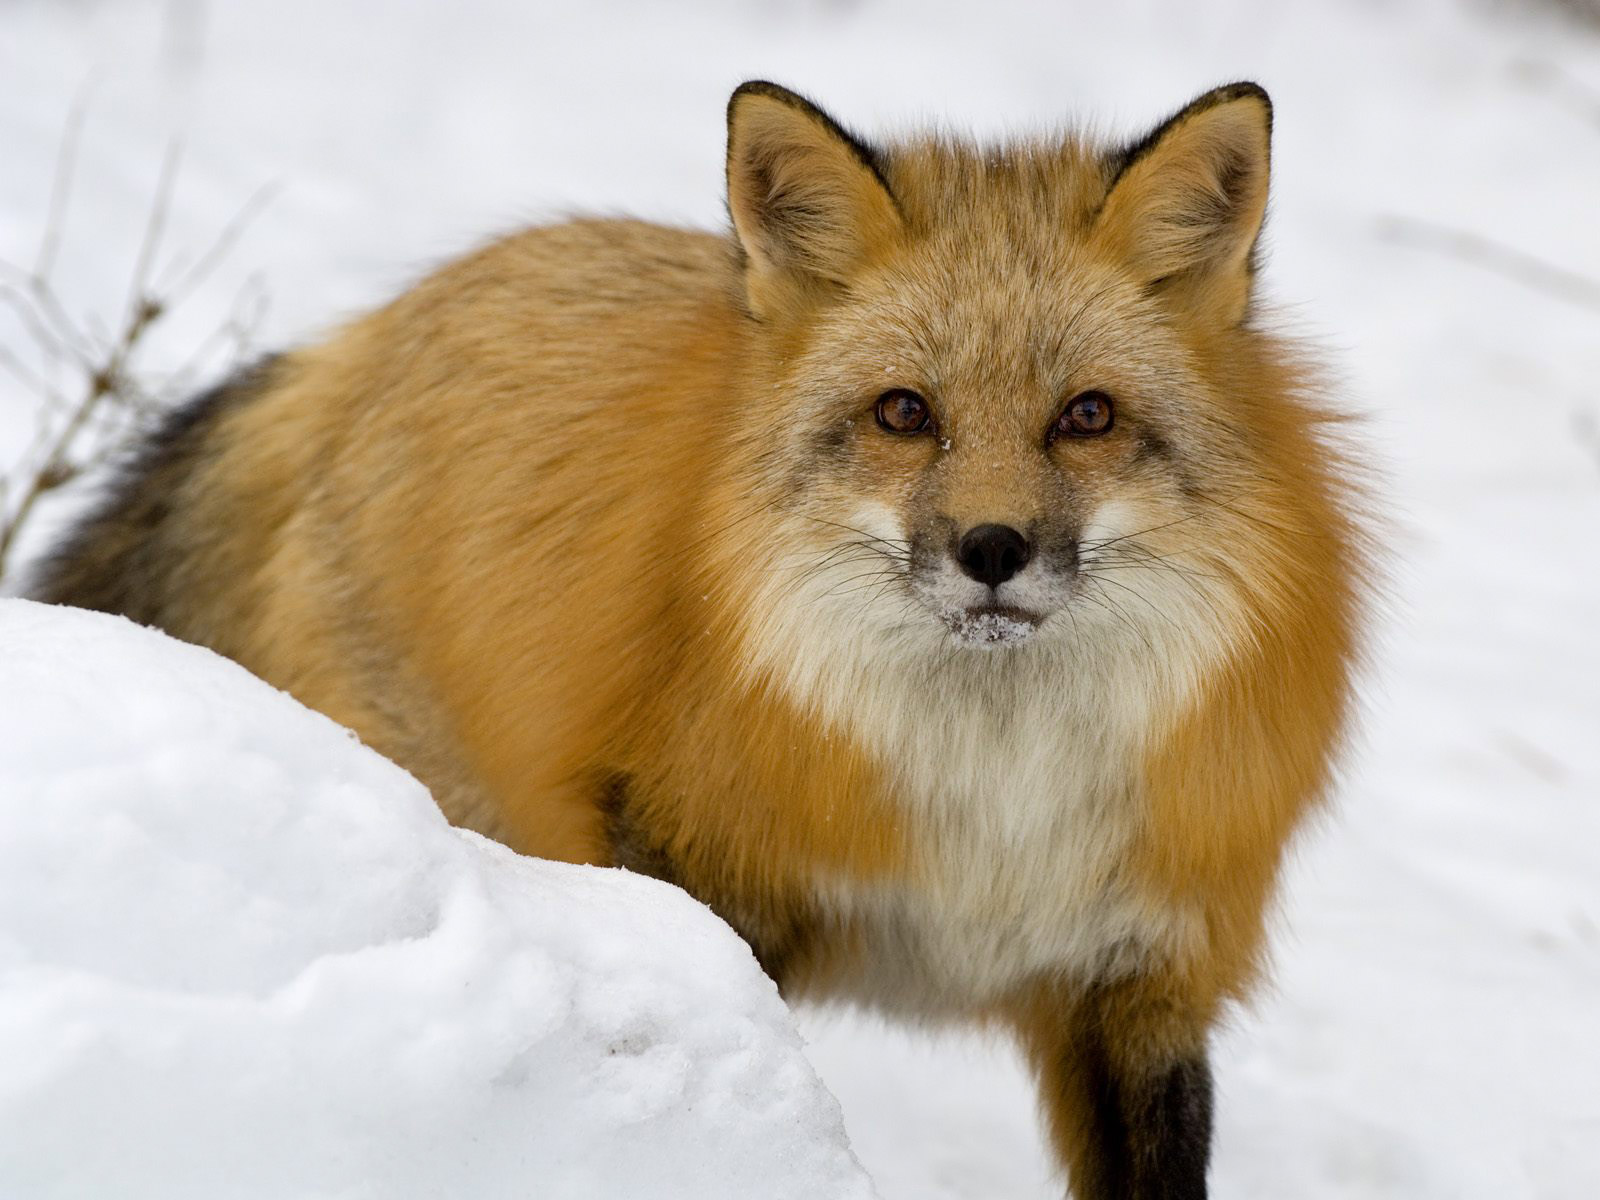 All About Animal Wildlife Red Fox Photos Image And Information